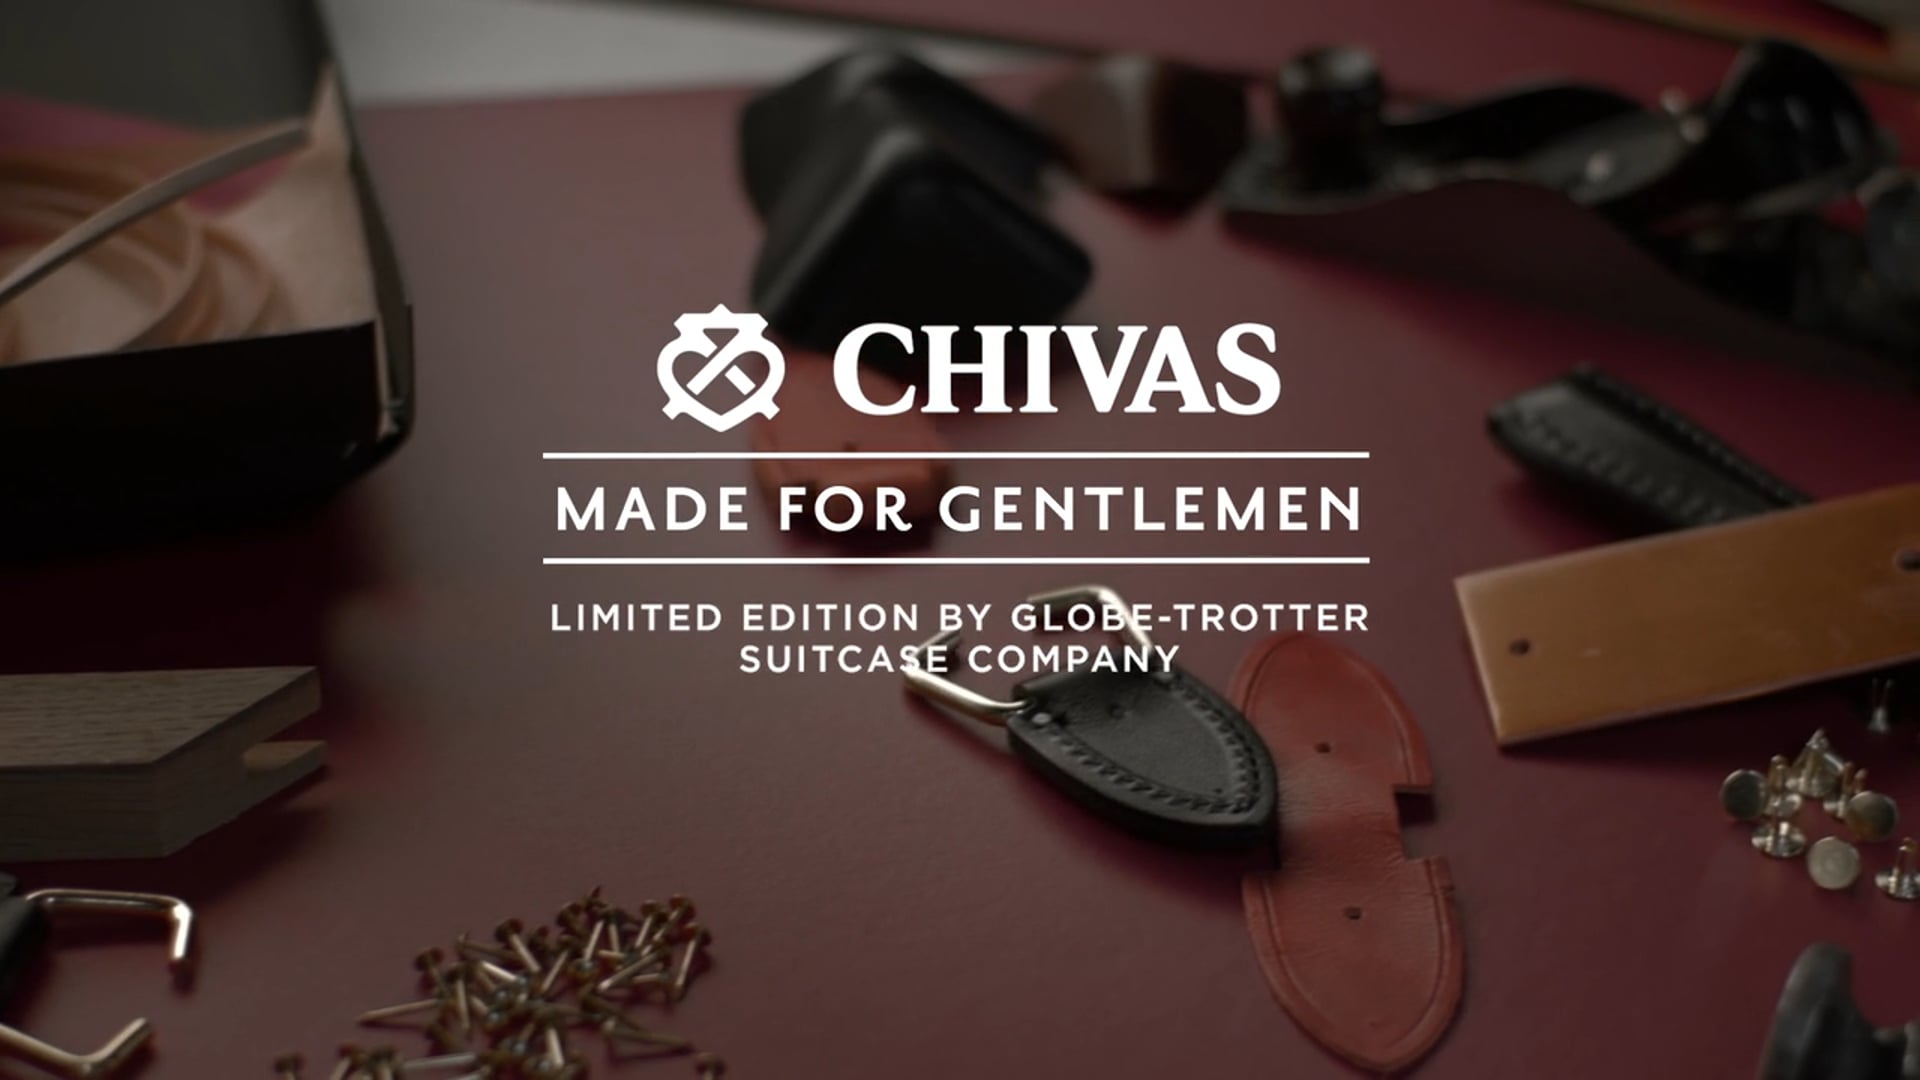 Made for Gentlemen by Globe-Trotter: The Making Of